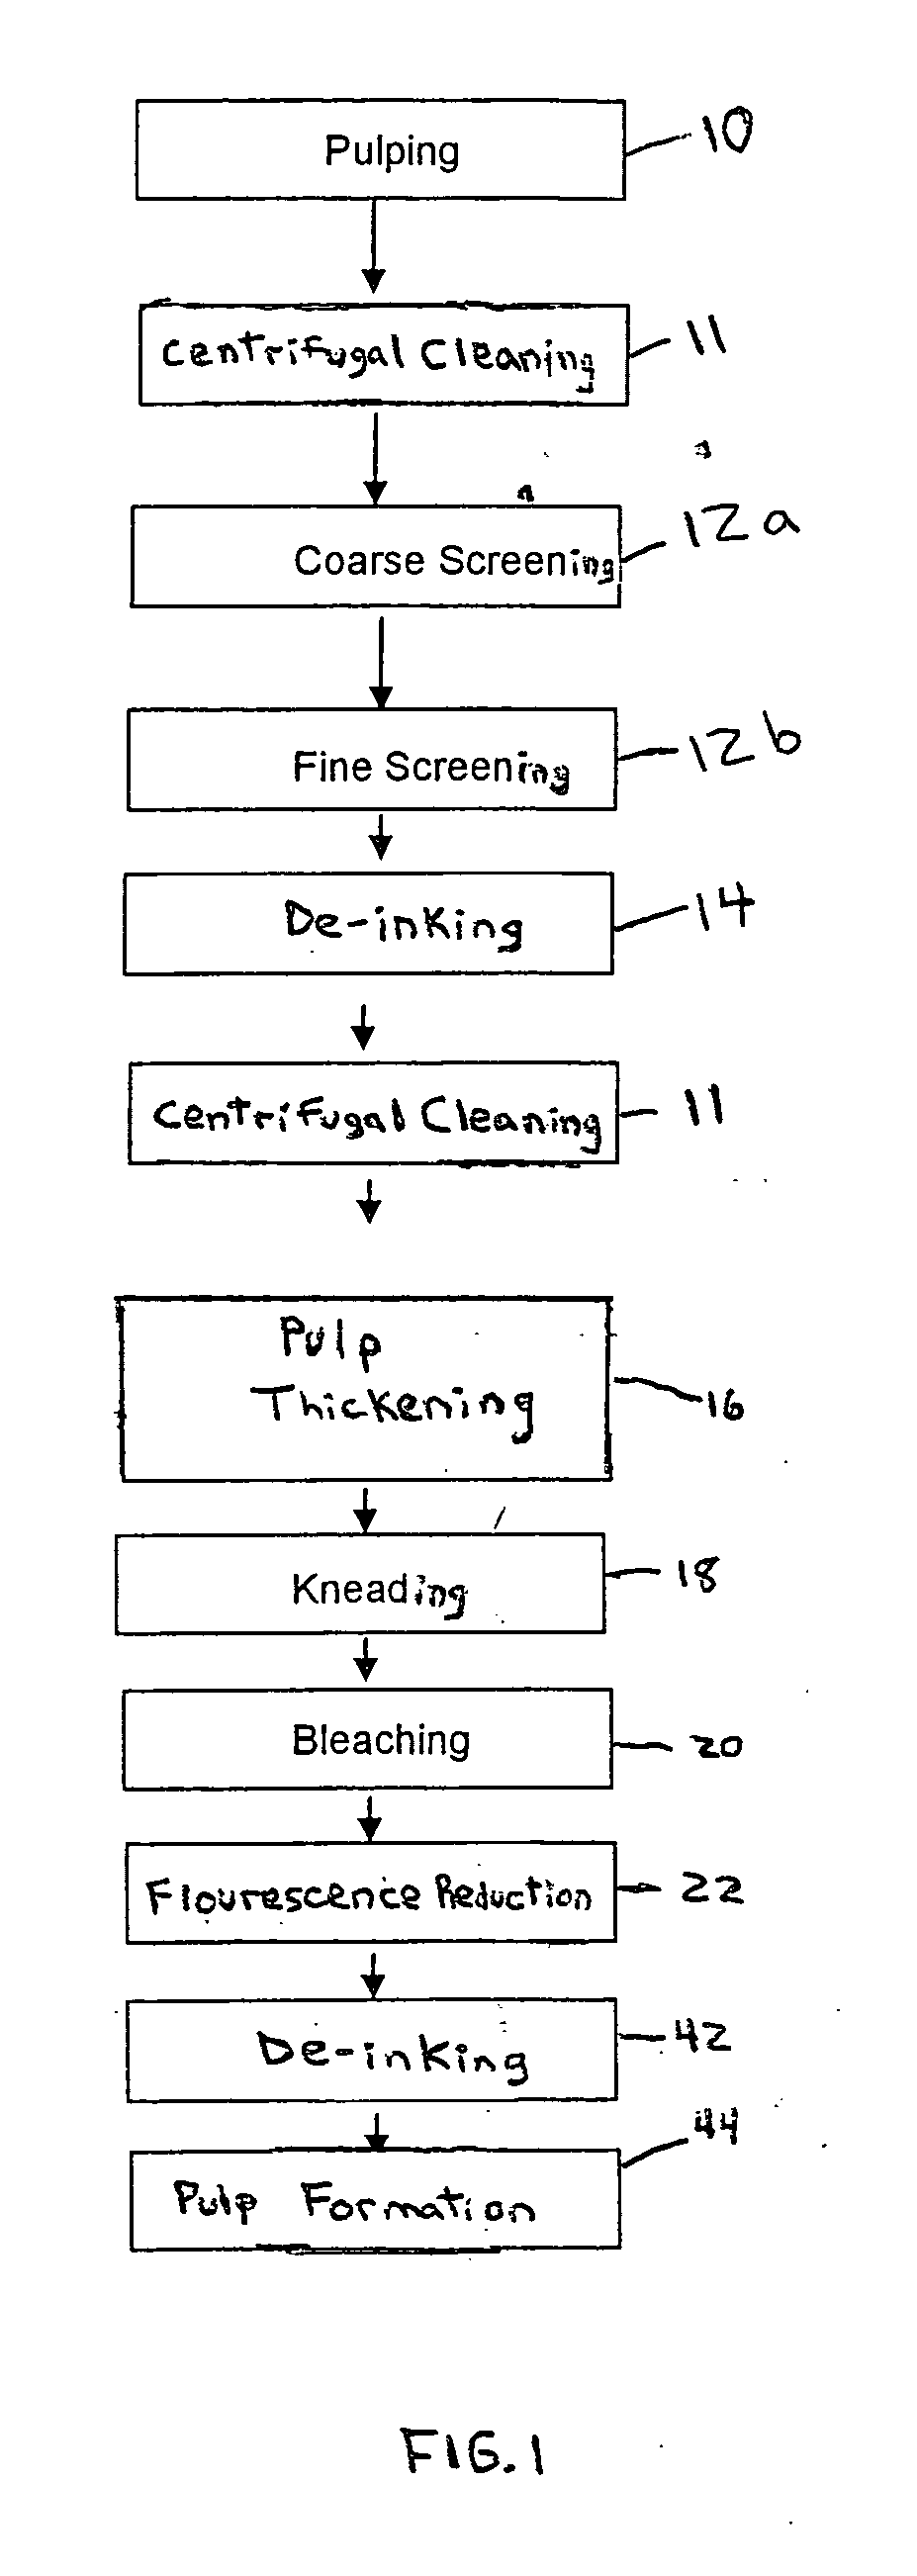 Methods for reducing fluorescence in pulp and paper